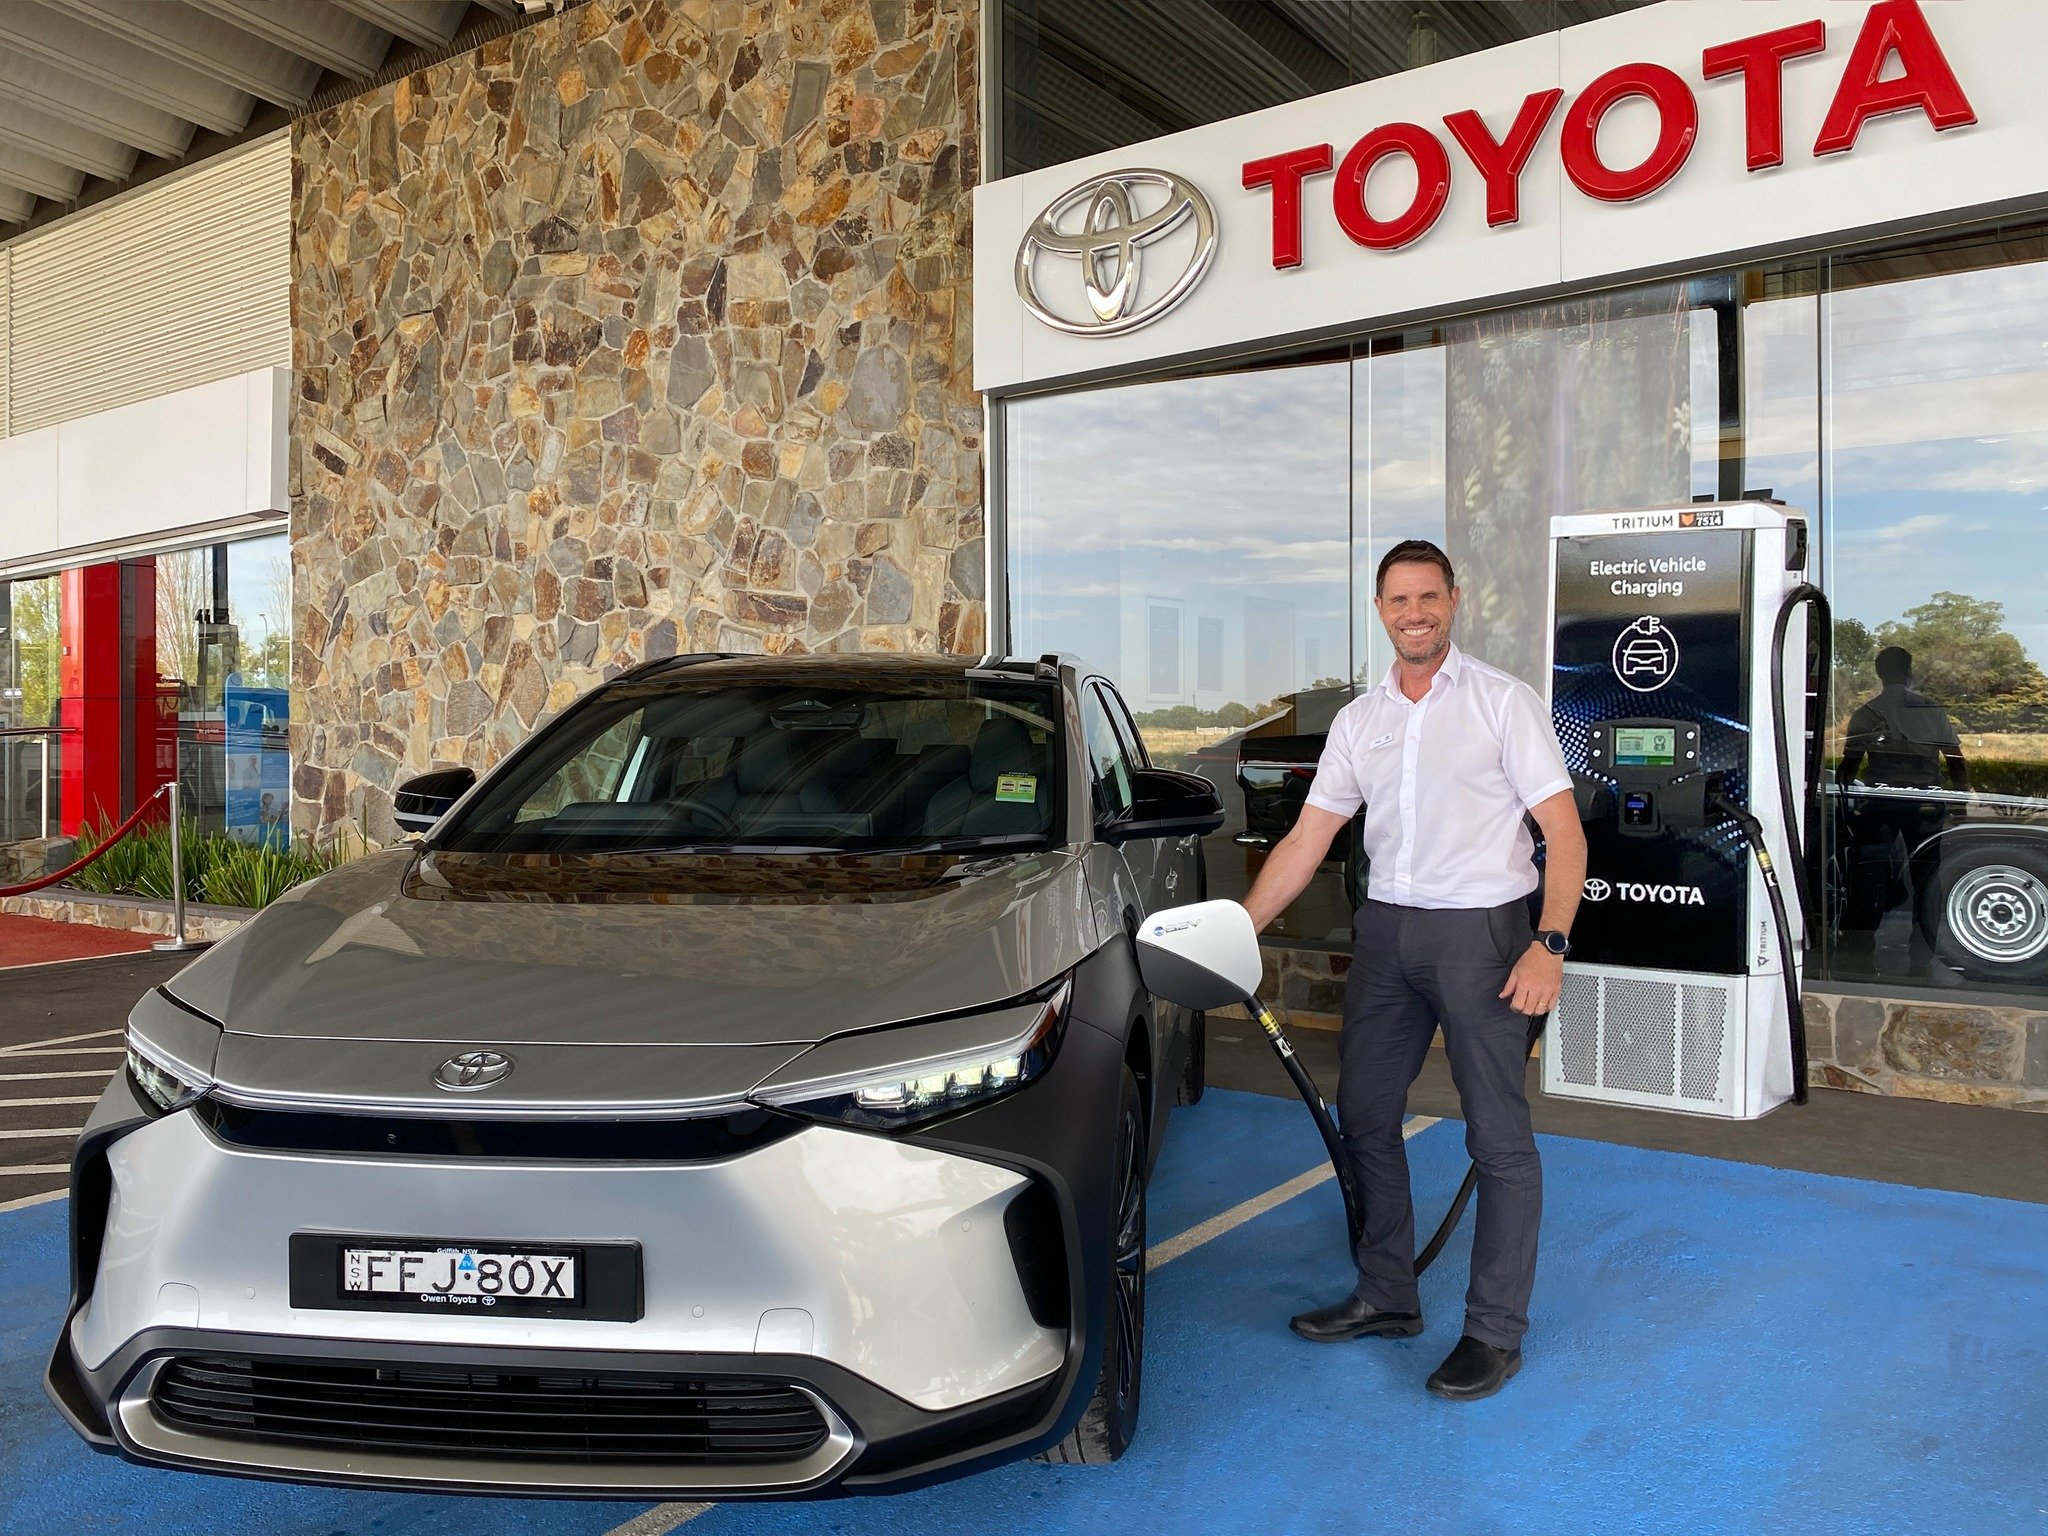 Eco and Sustainability Feature spotlight - Owen Toyota 

Owen Toyota, right here in our community; just a hop, skip and a jump to Griffith, has a whole bunch of electric vehicles ready to roll. 
Their new bZ4X is kind of a game changer - it's spaciou